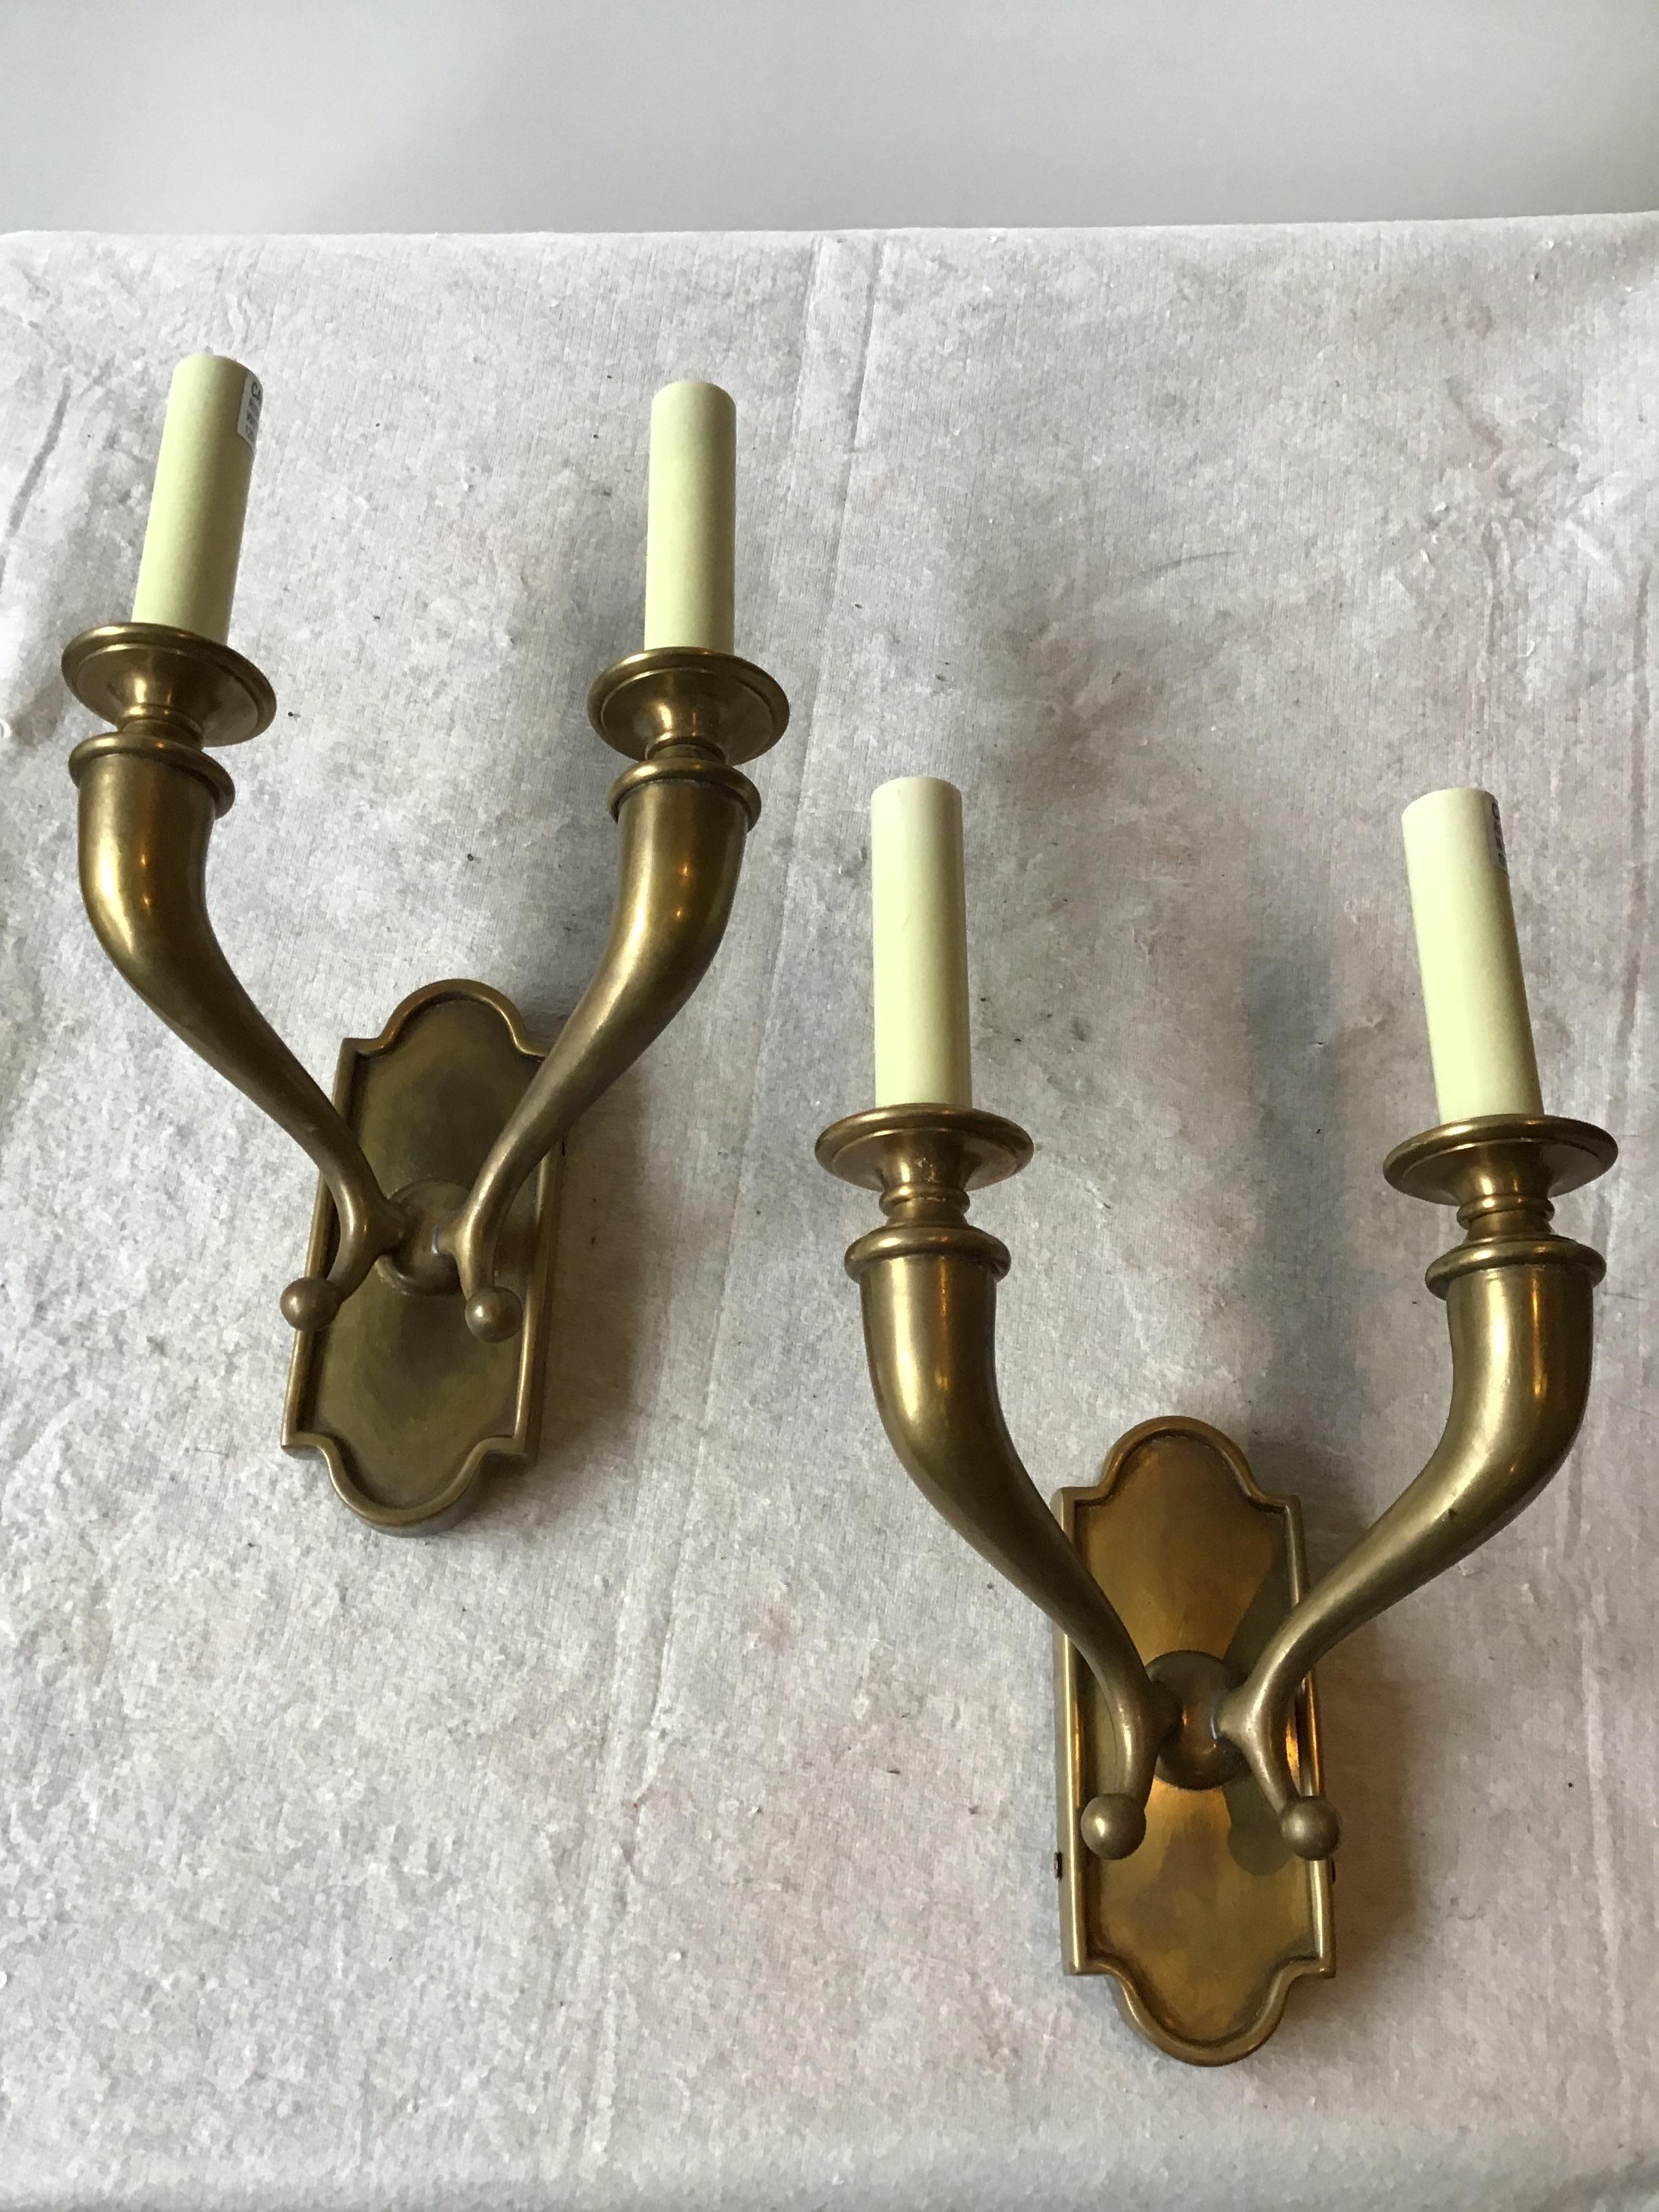 4 solid brass double arm classical sconces out of a Greenwich, Connecticut mansion. Sold in pairs.